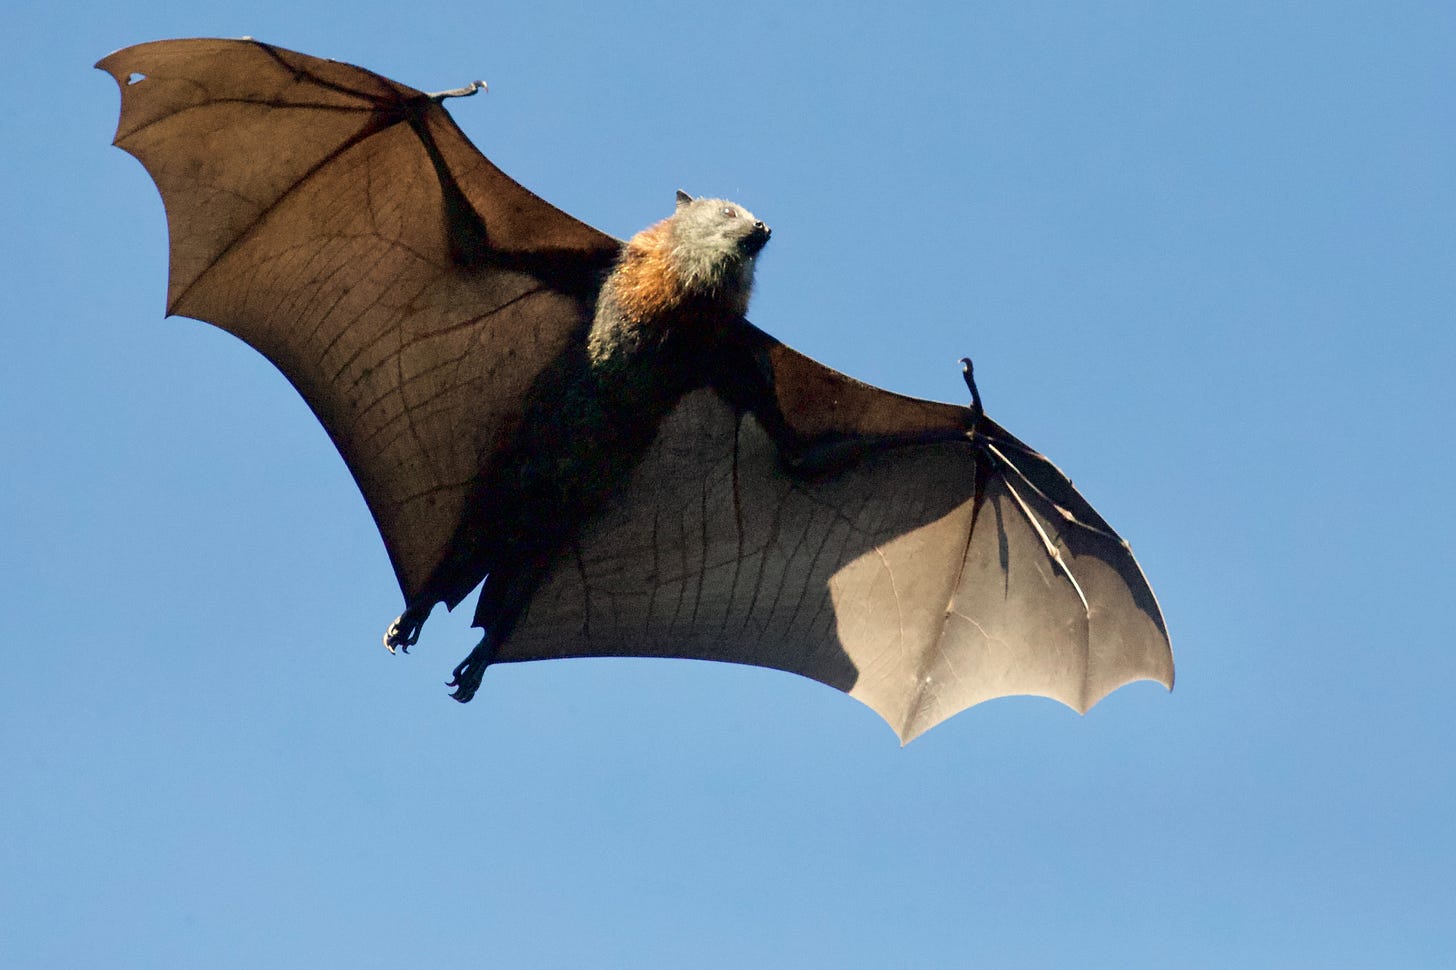 A bat soaring through the air, wings extended and toes curled up, with a fringe of brown fur on their neck amid the grey fur